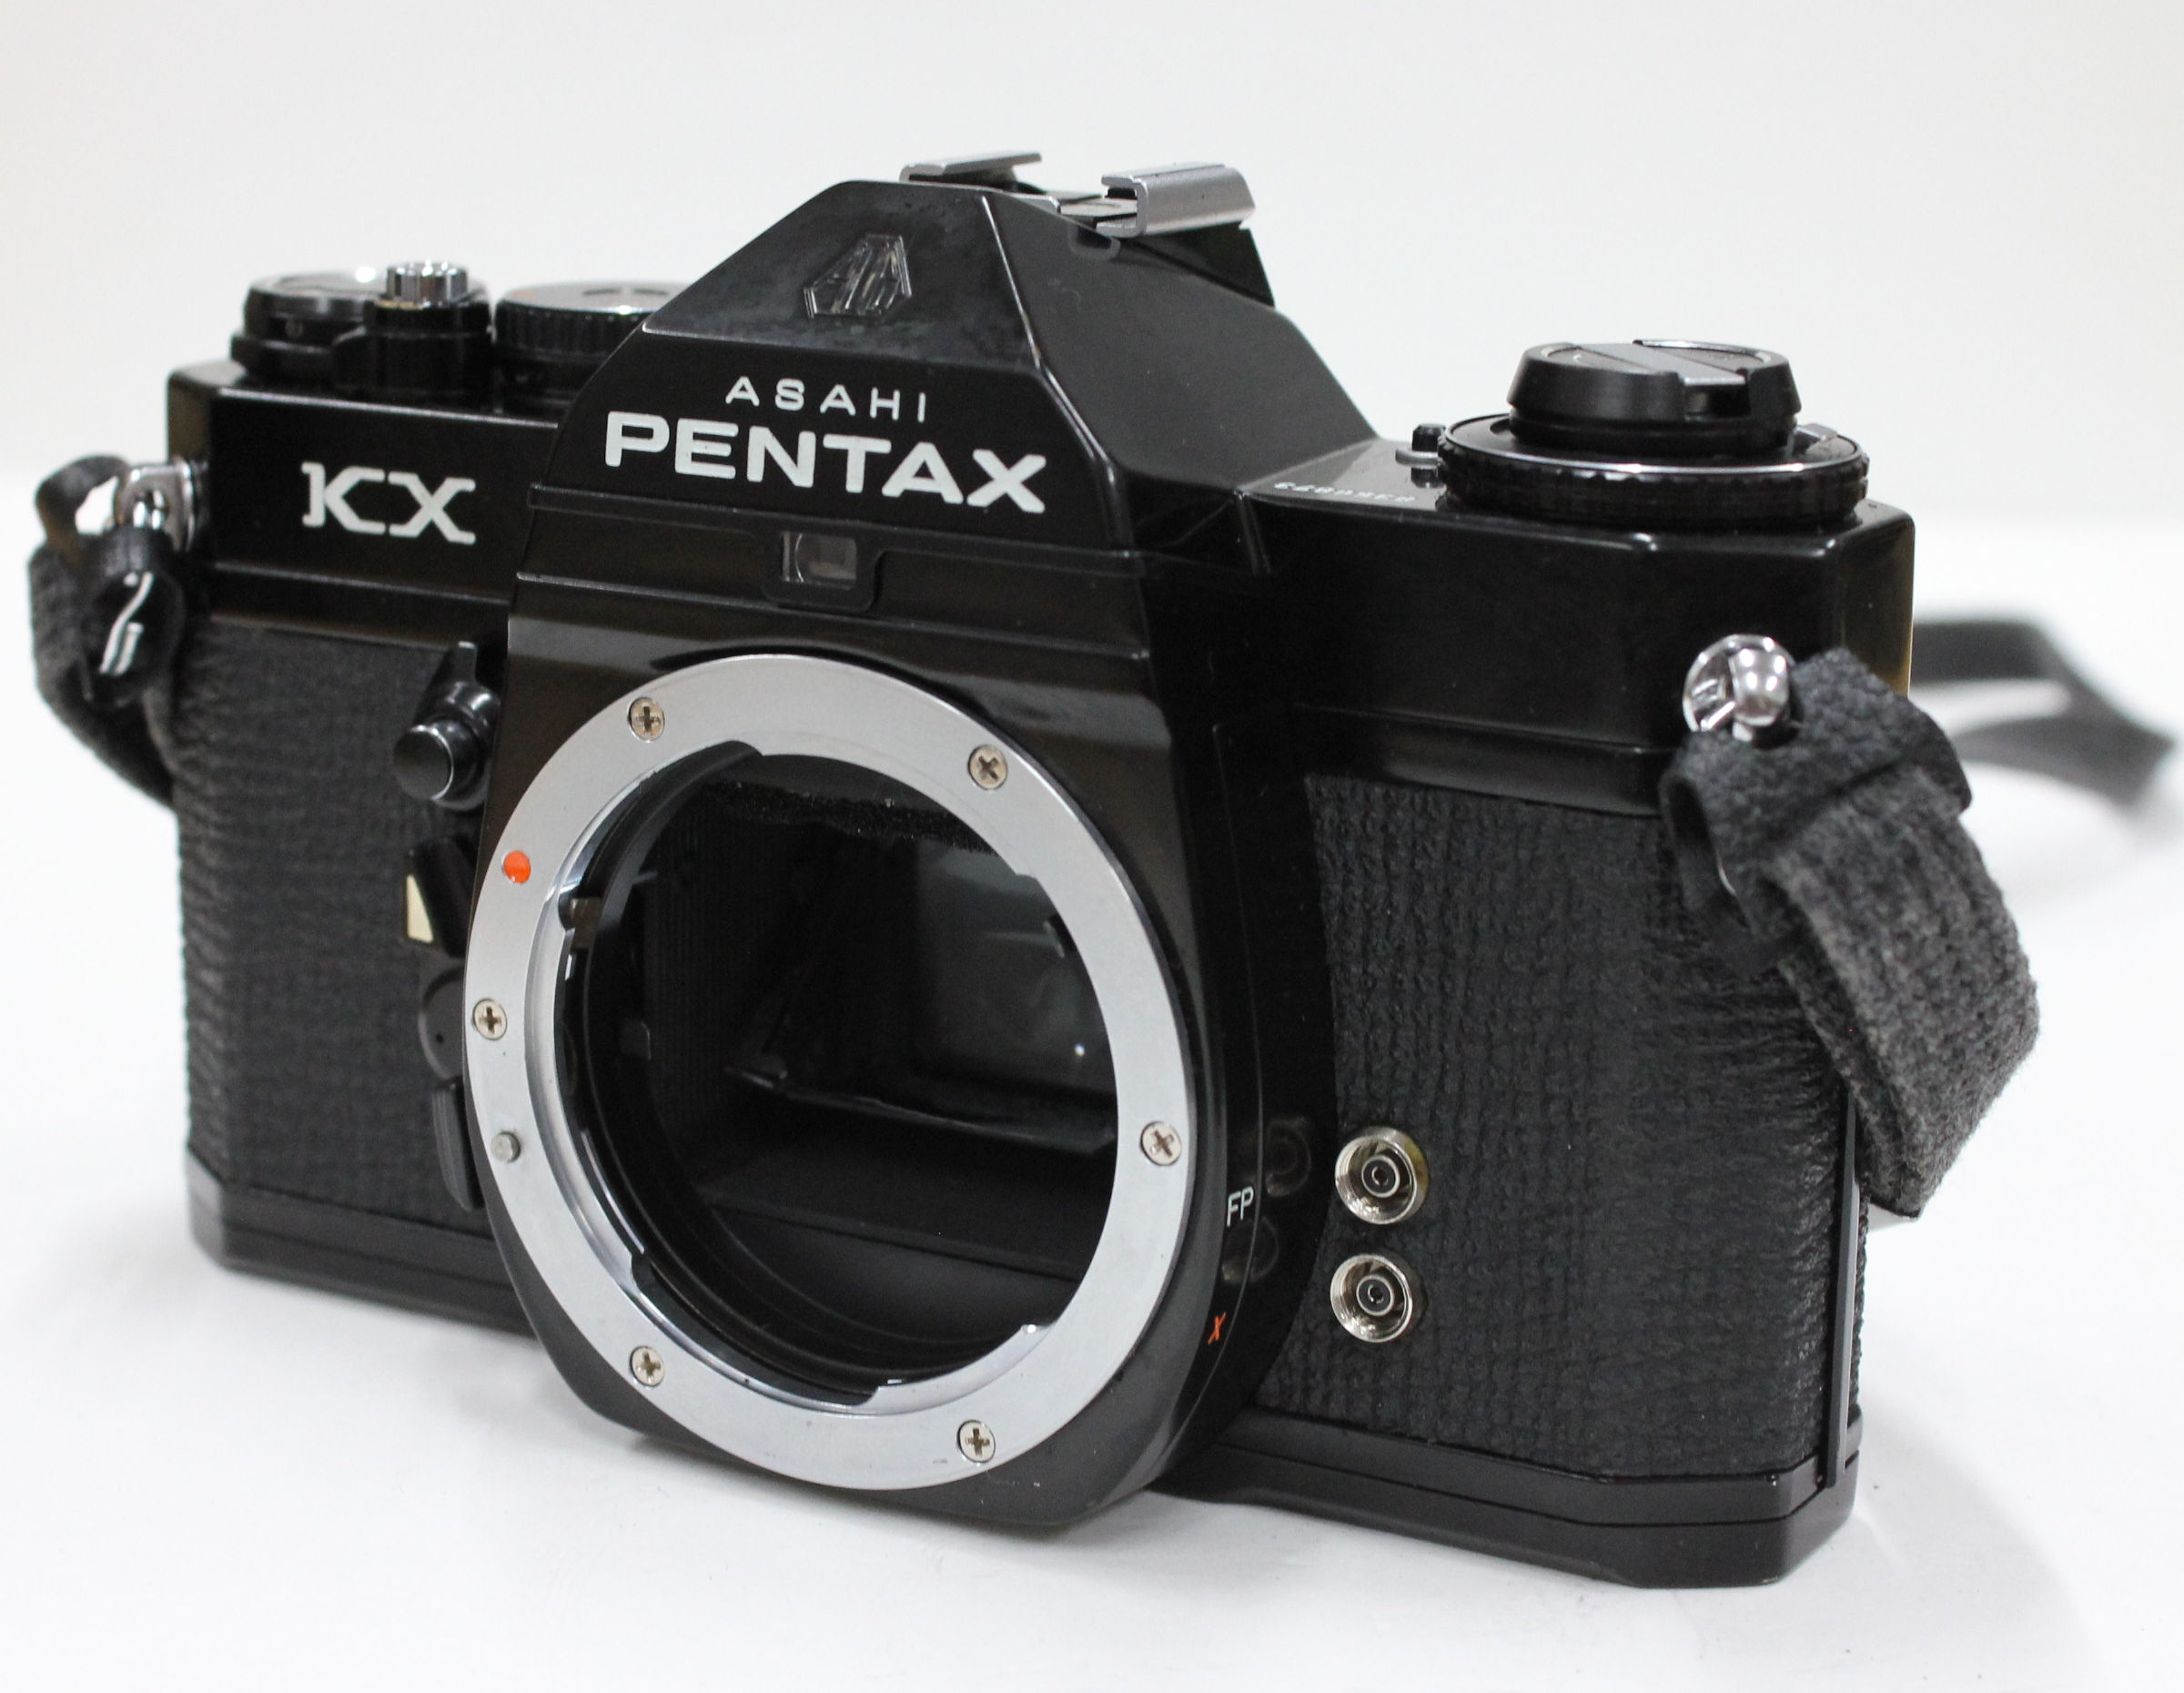 Pentax KX Body with SMC PENTAX 55mm F/1.8 Lens and Filter, Camera